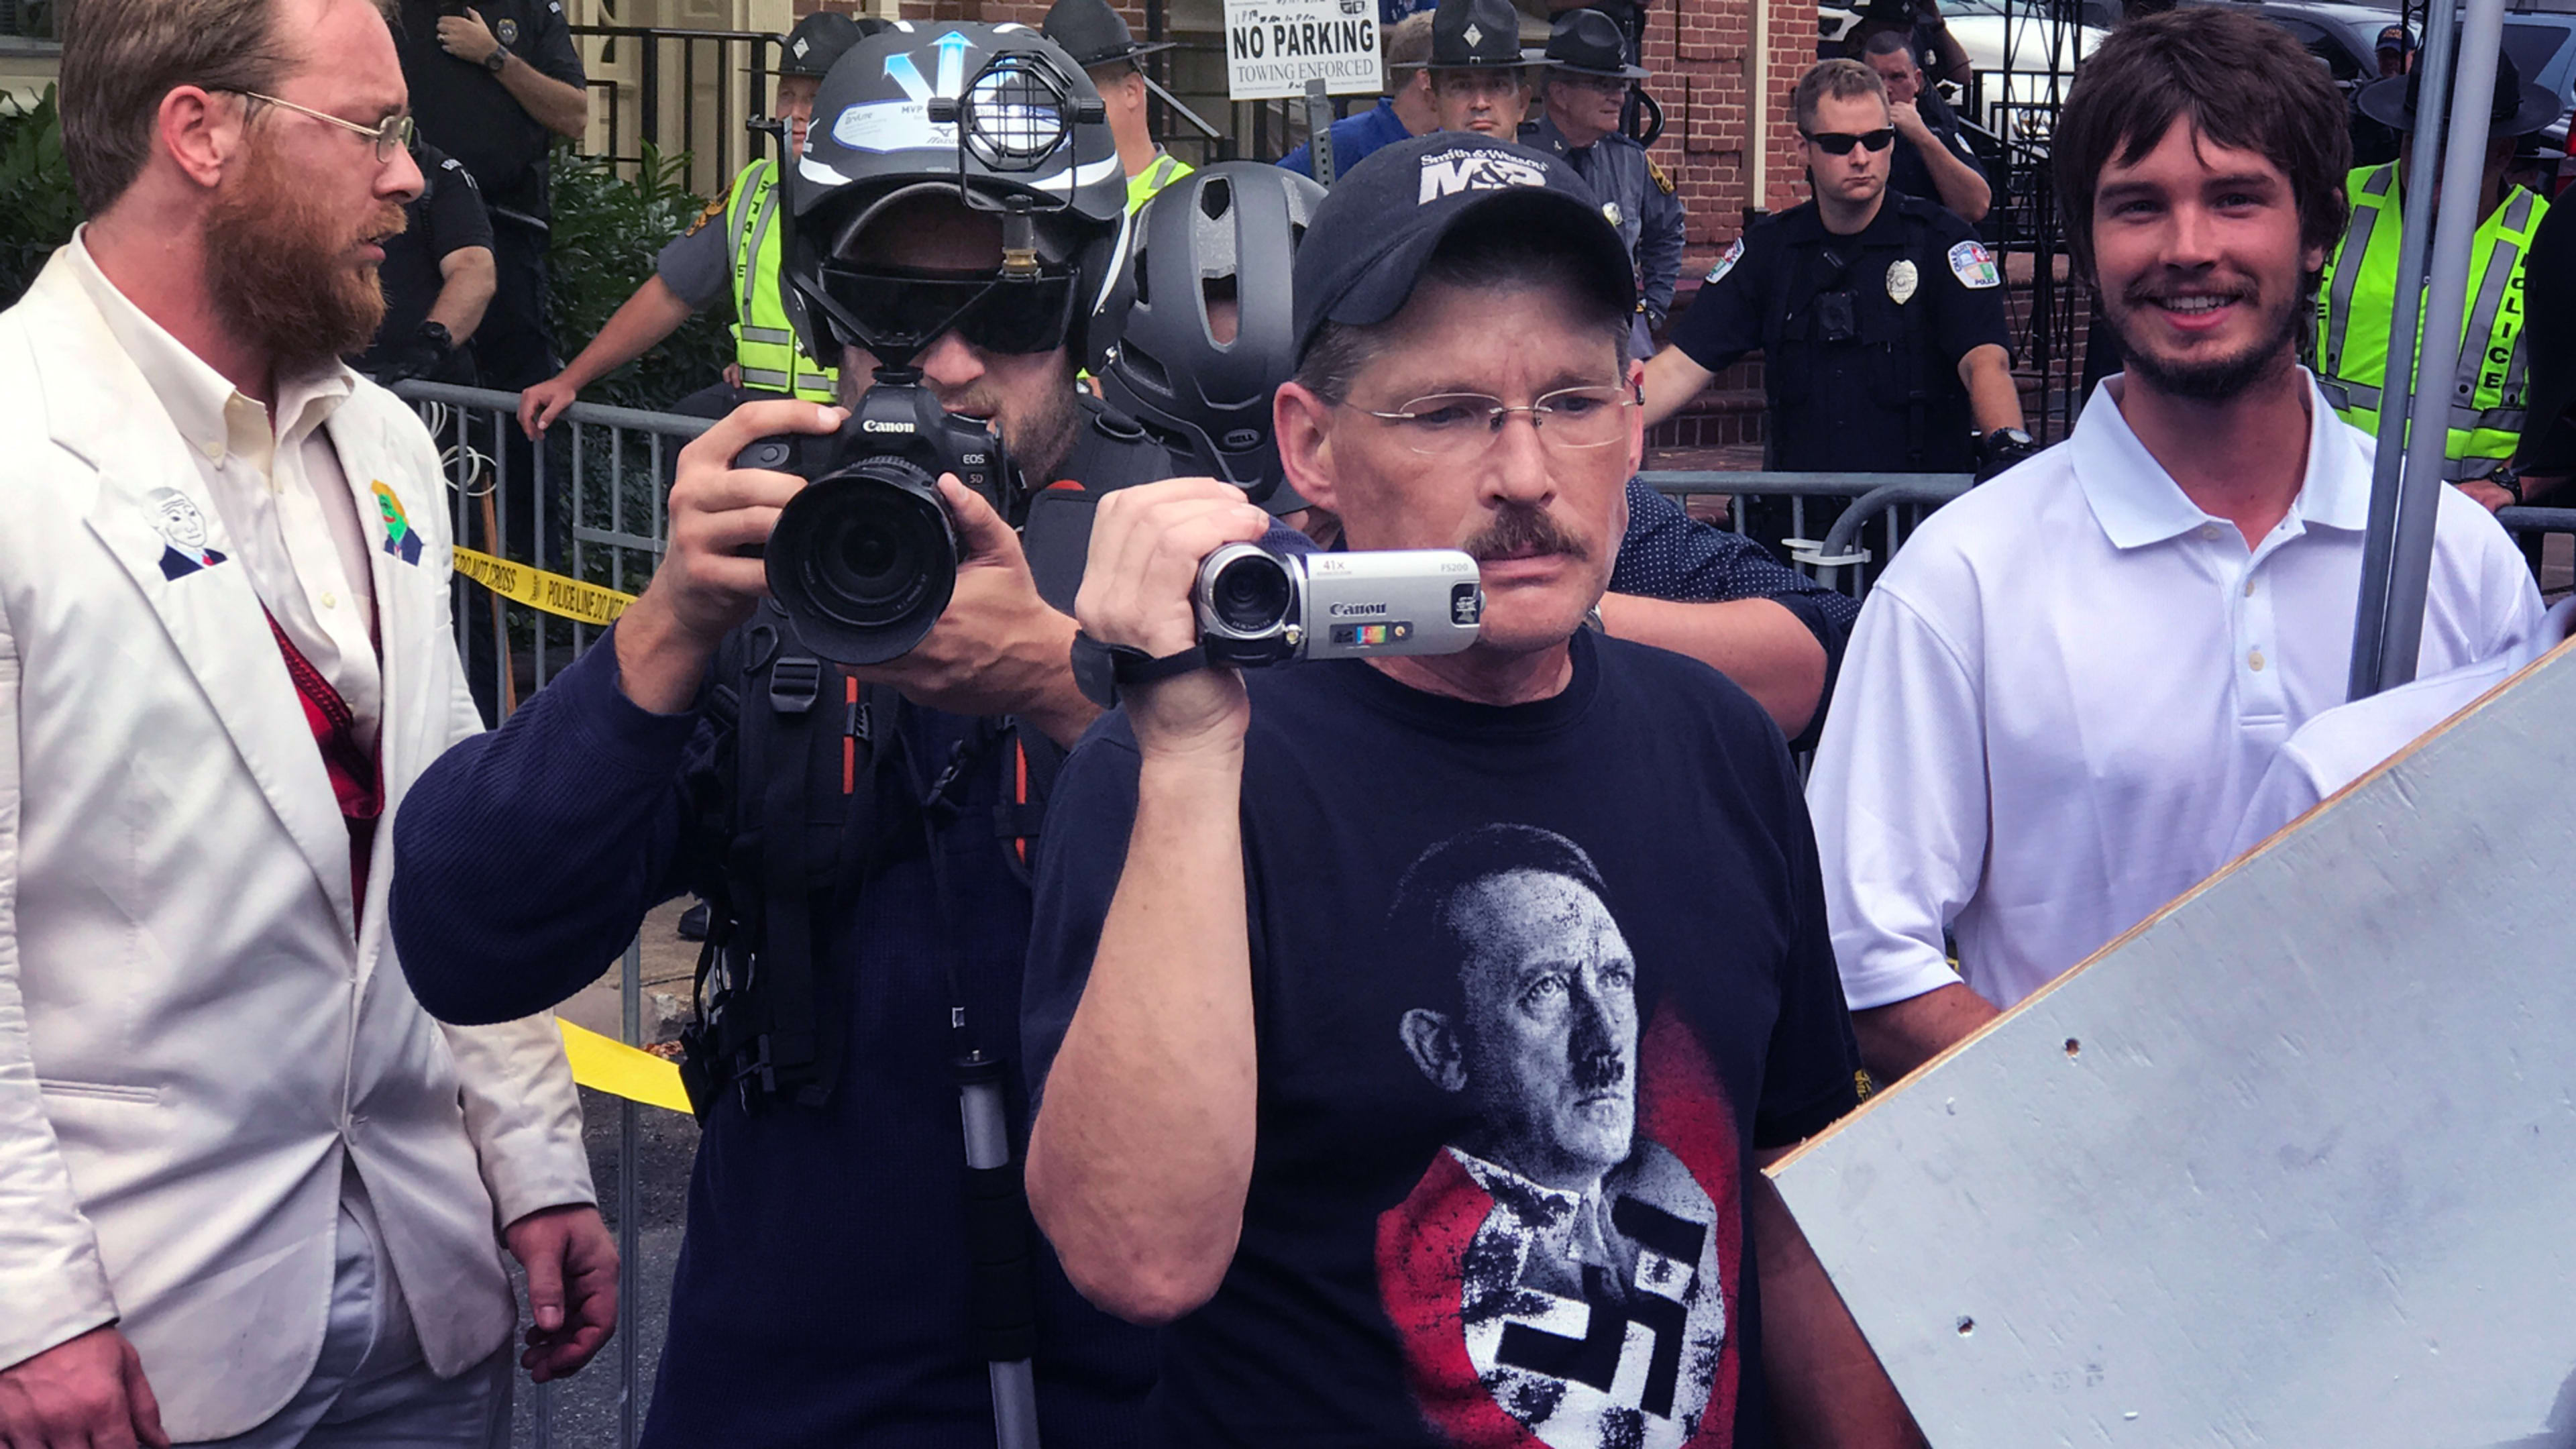 Facebook says this anti-“Unite the Right” rally in D.C. was organized by trolls